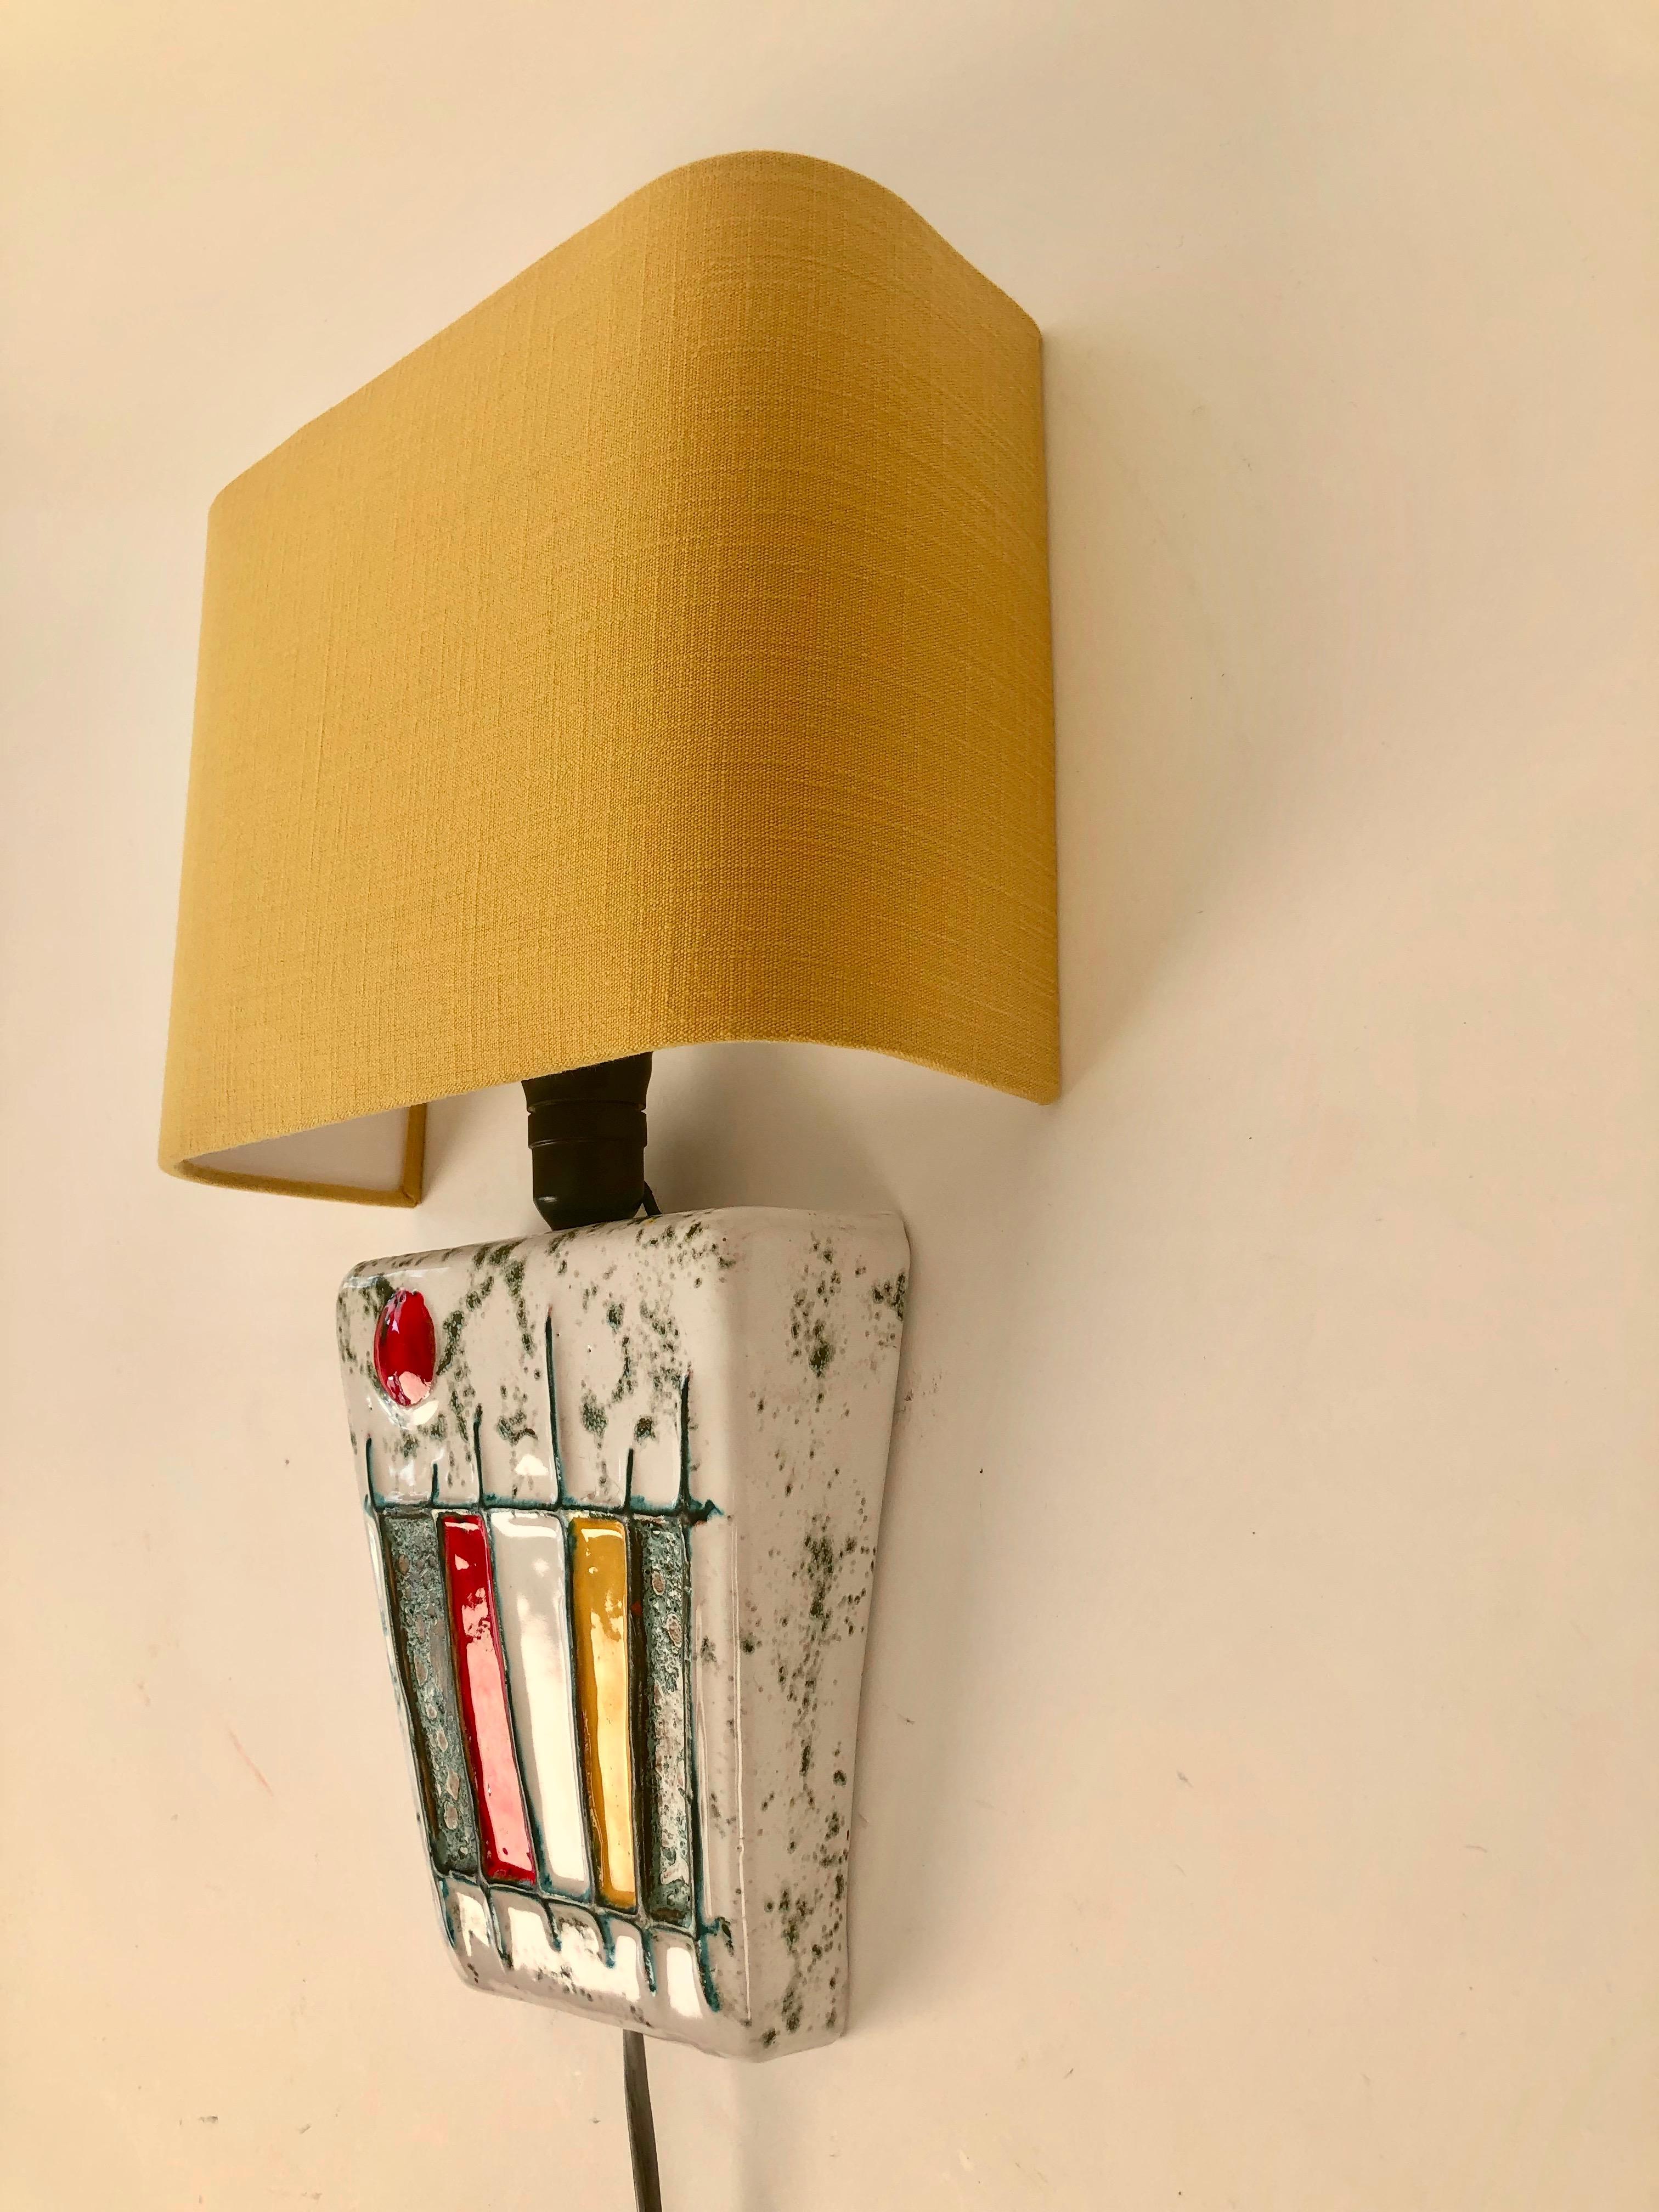 Mid-Century Modern Modernist Wall Light from The Studio Ceramics Movement, 1950's, Hungary For Sale